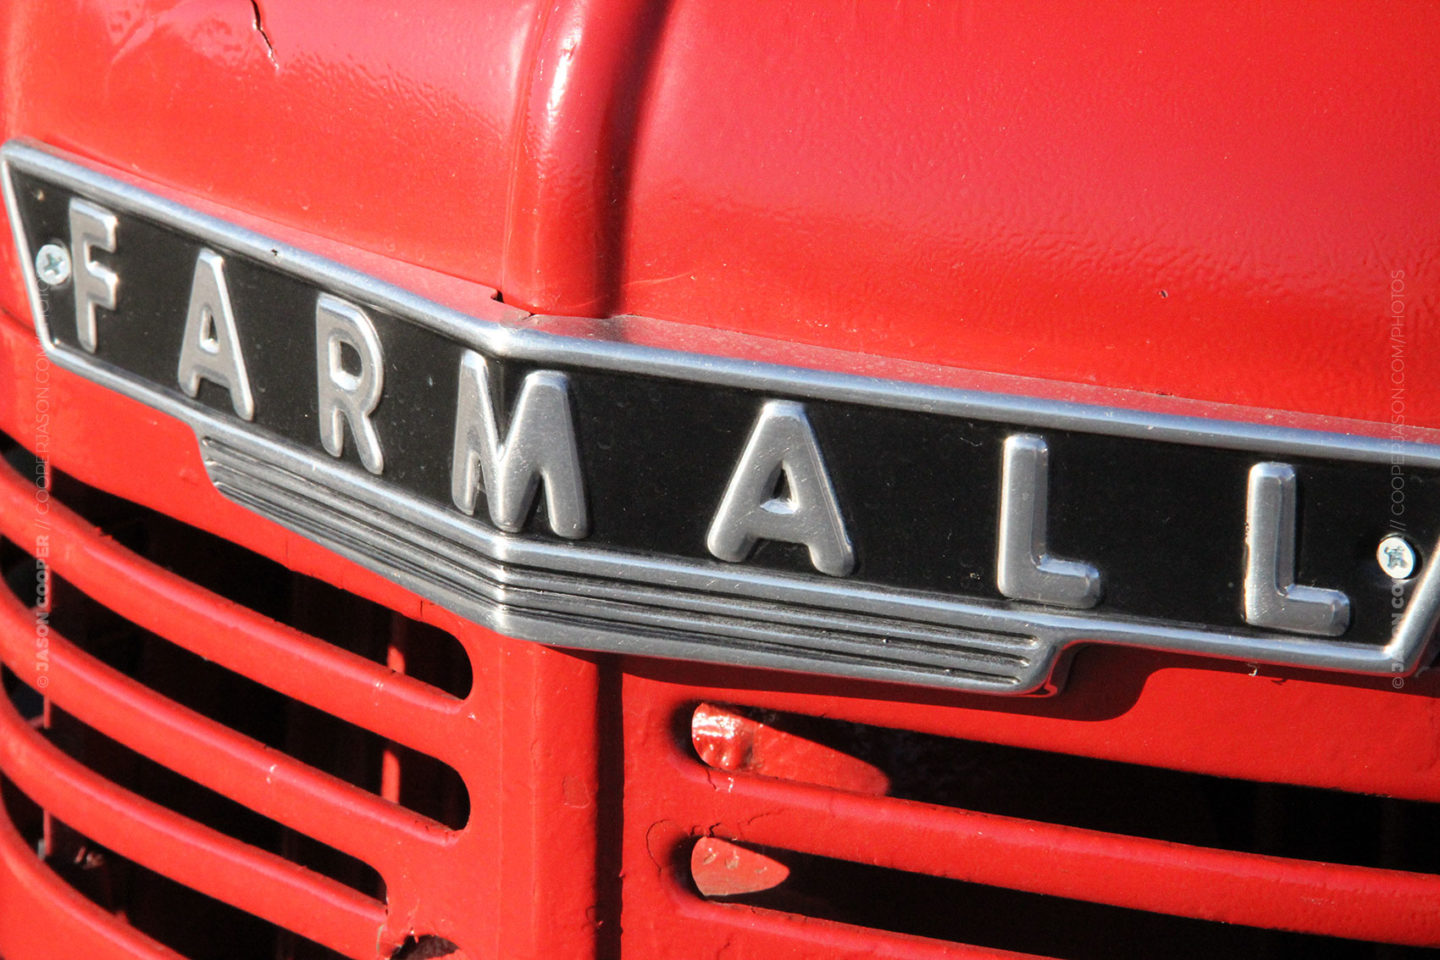 photo of the grill of an old red McCormick Farmall tractore